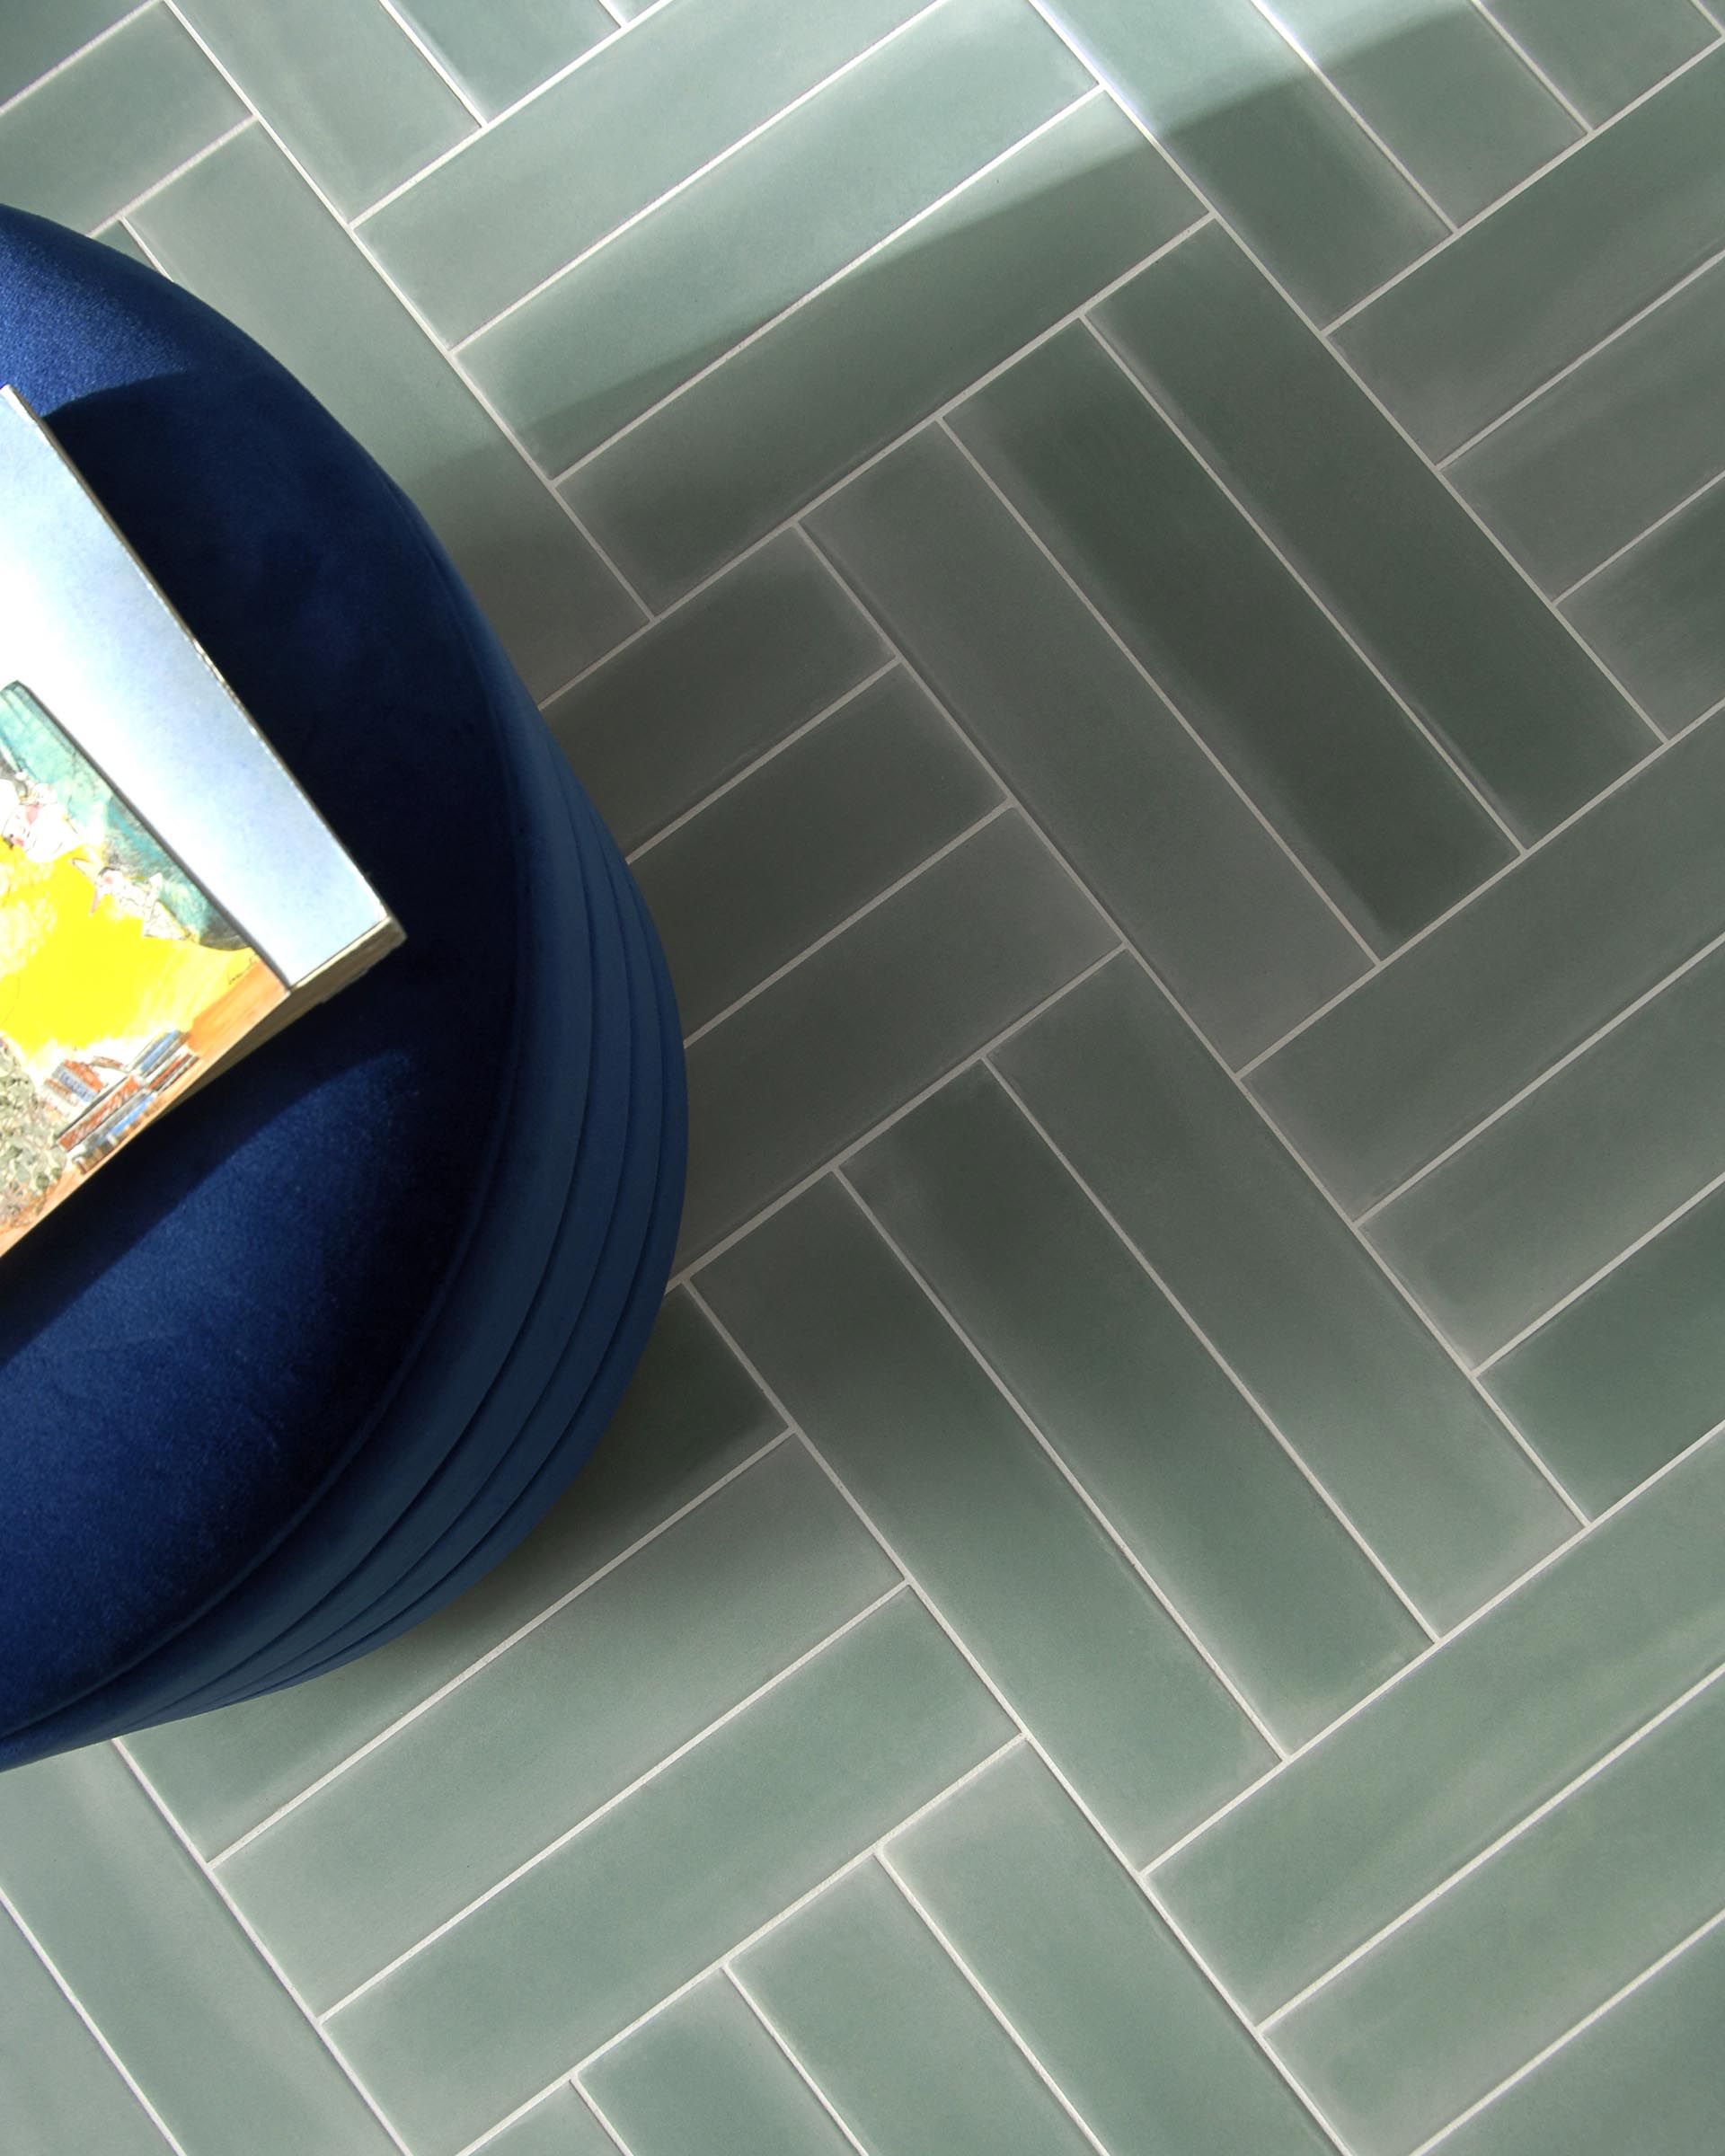 Blue-green tiles combine the tranquil effects of blue with the optimistic feeling of green.